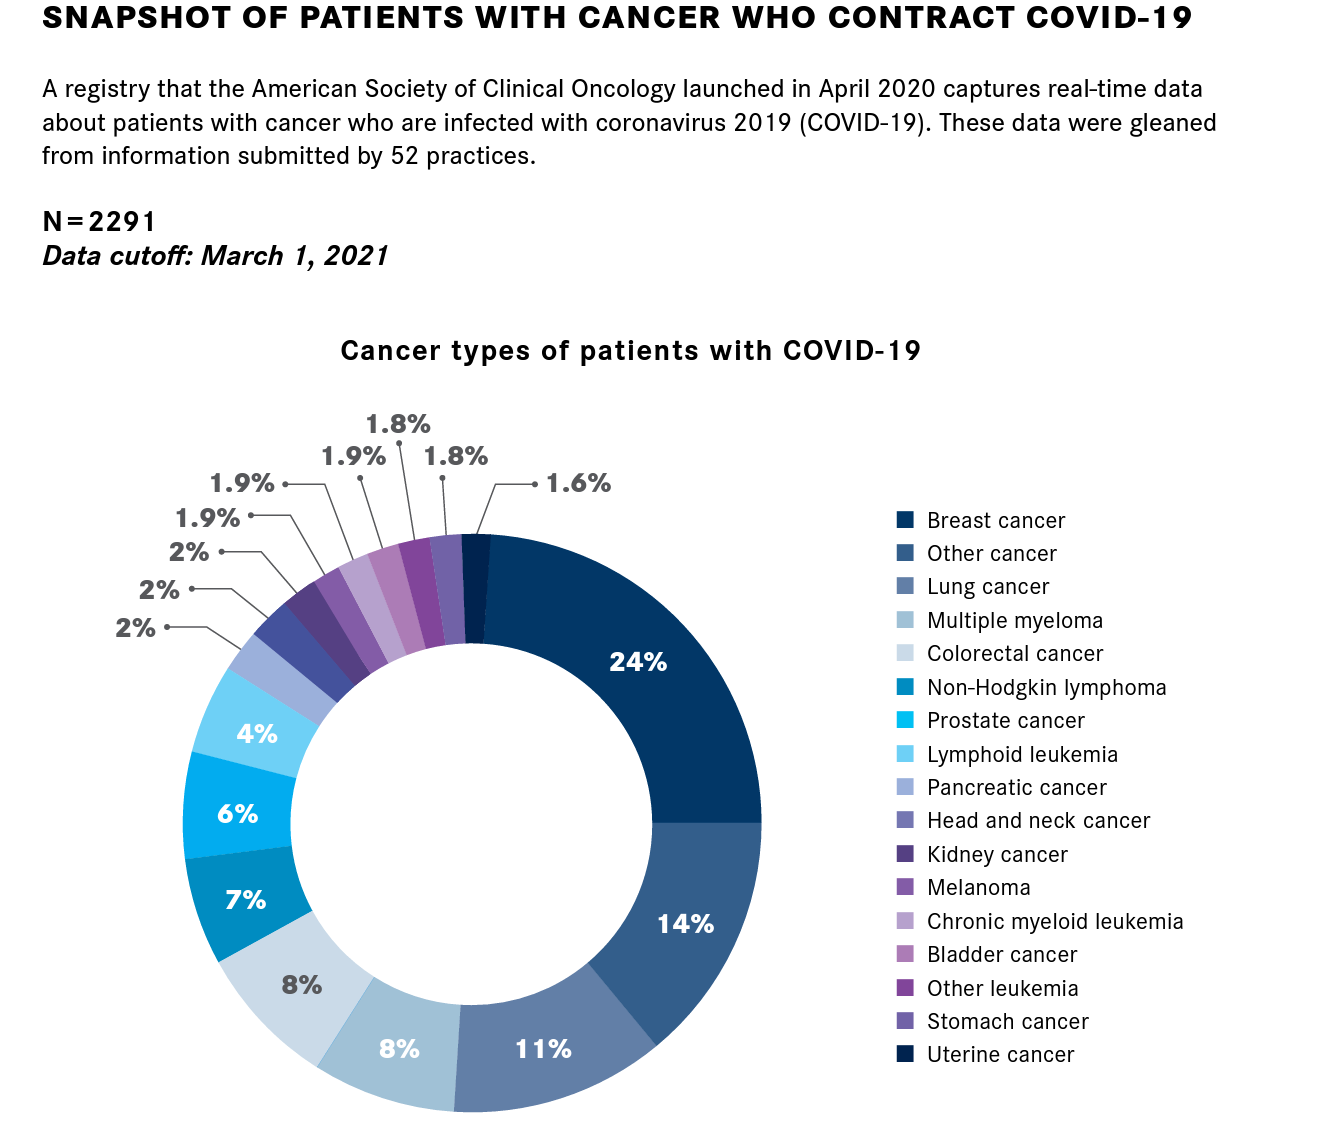 Snapshot of patients with cancer who contract COVID-19